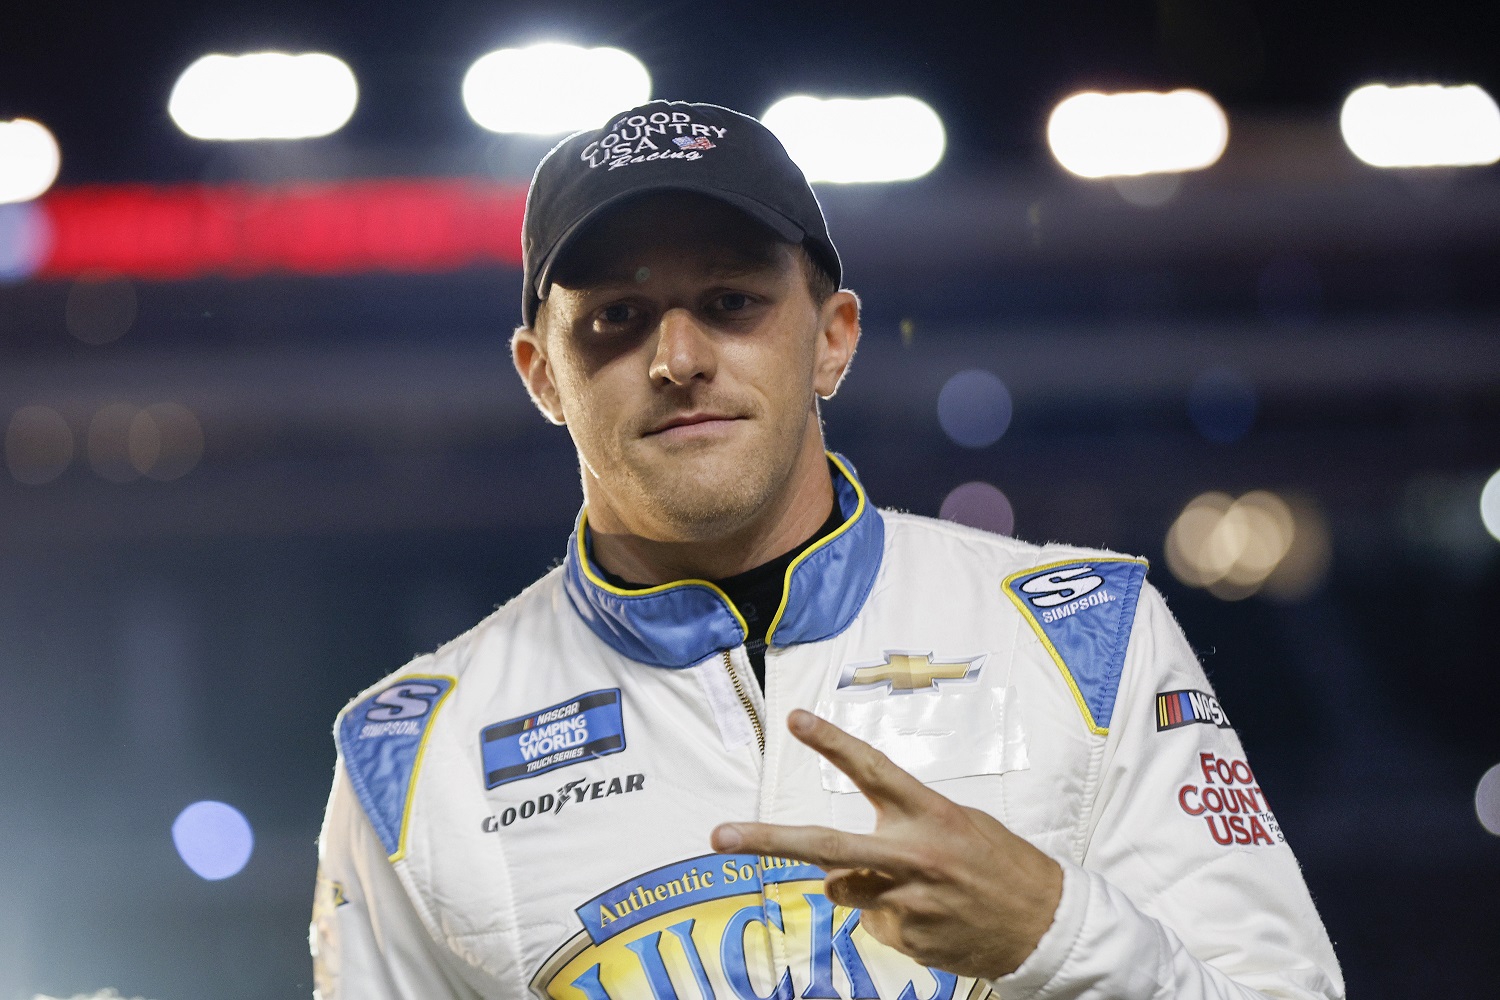 Parker Kligerman’s Idea for More Racing Is Interesting but Won’t Work